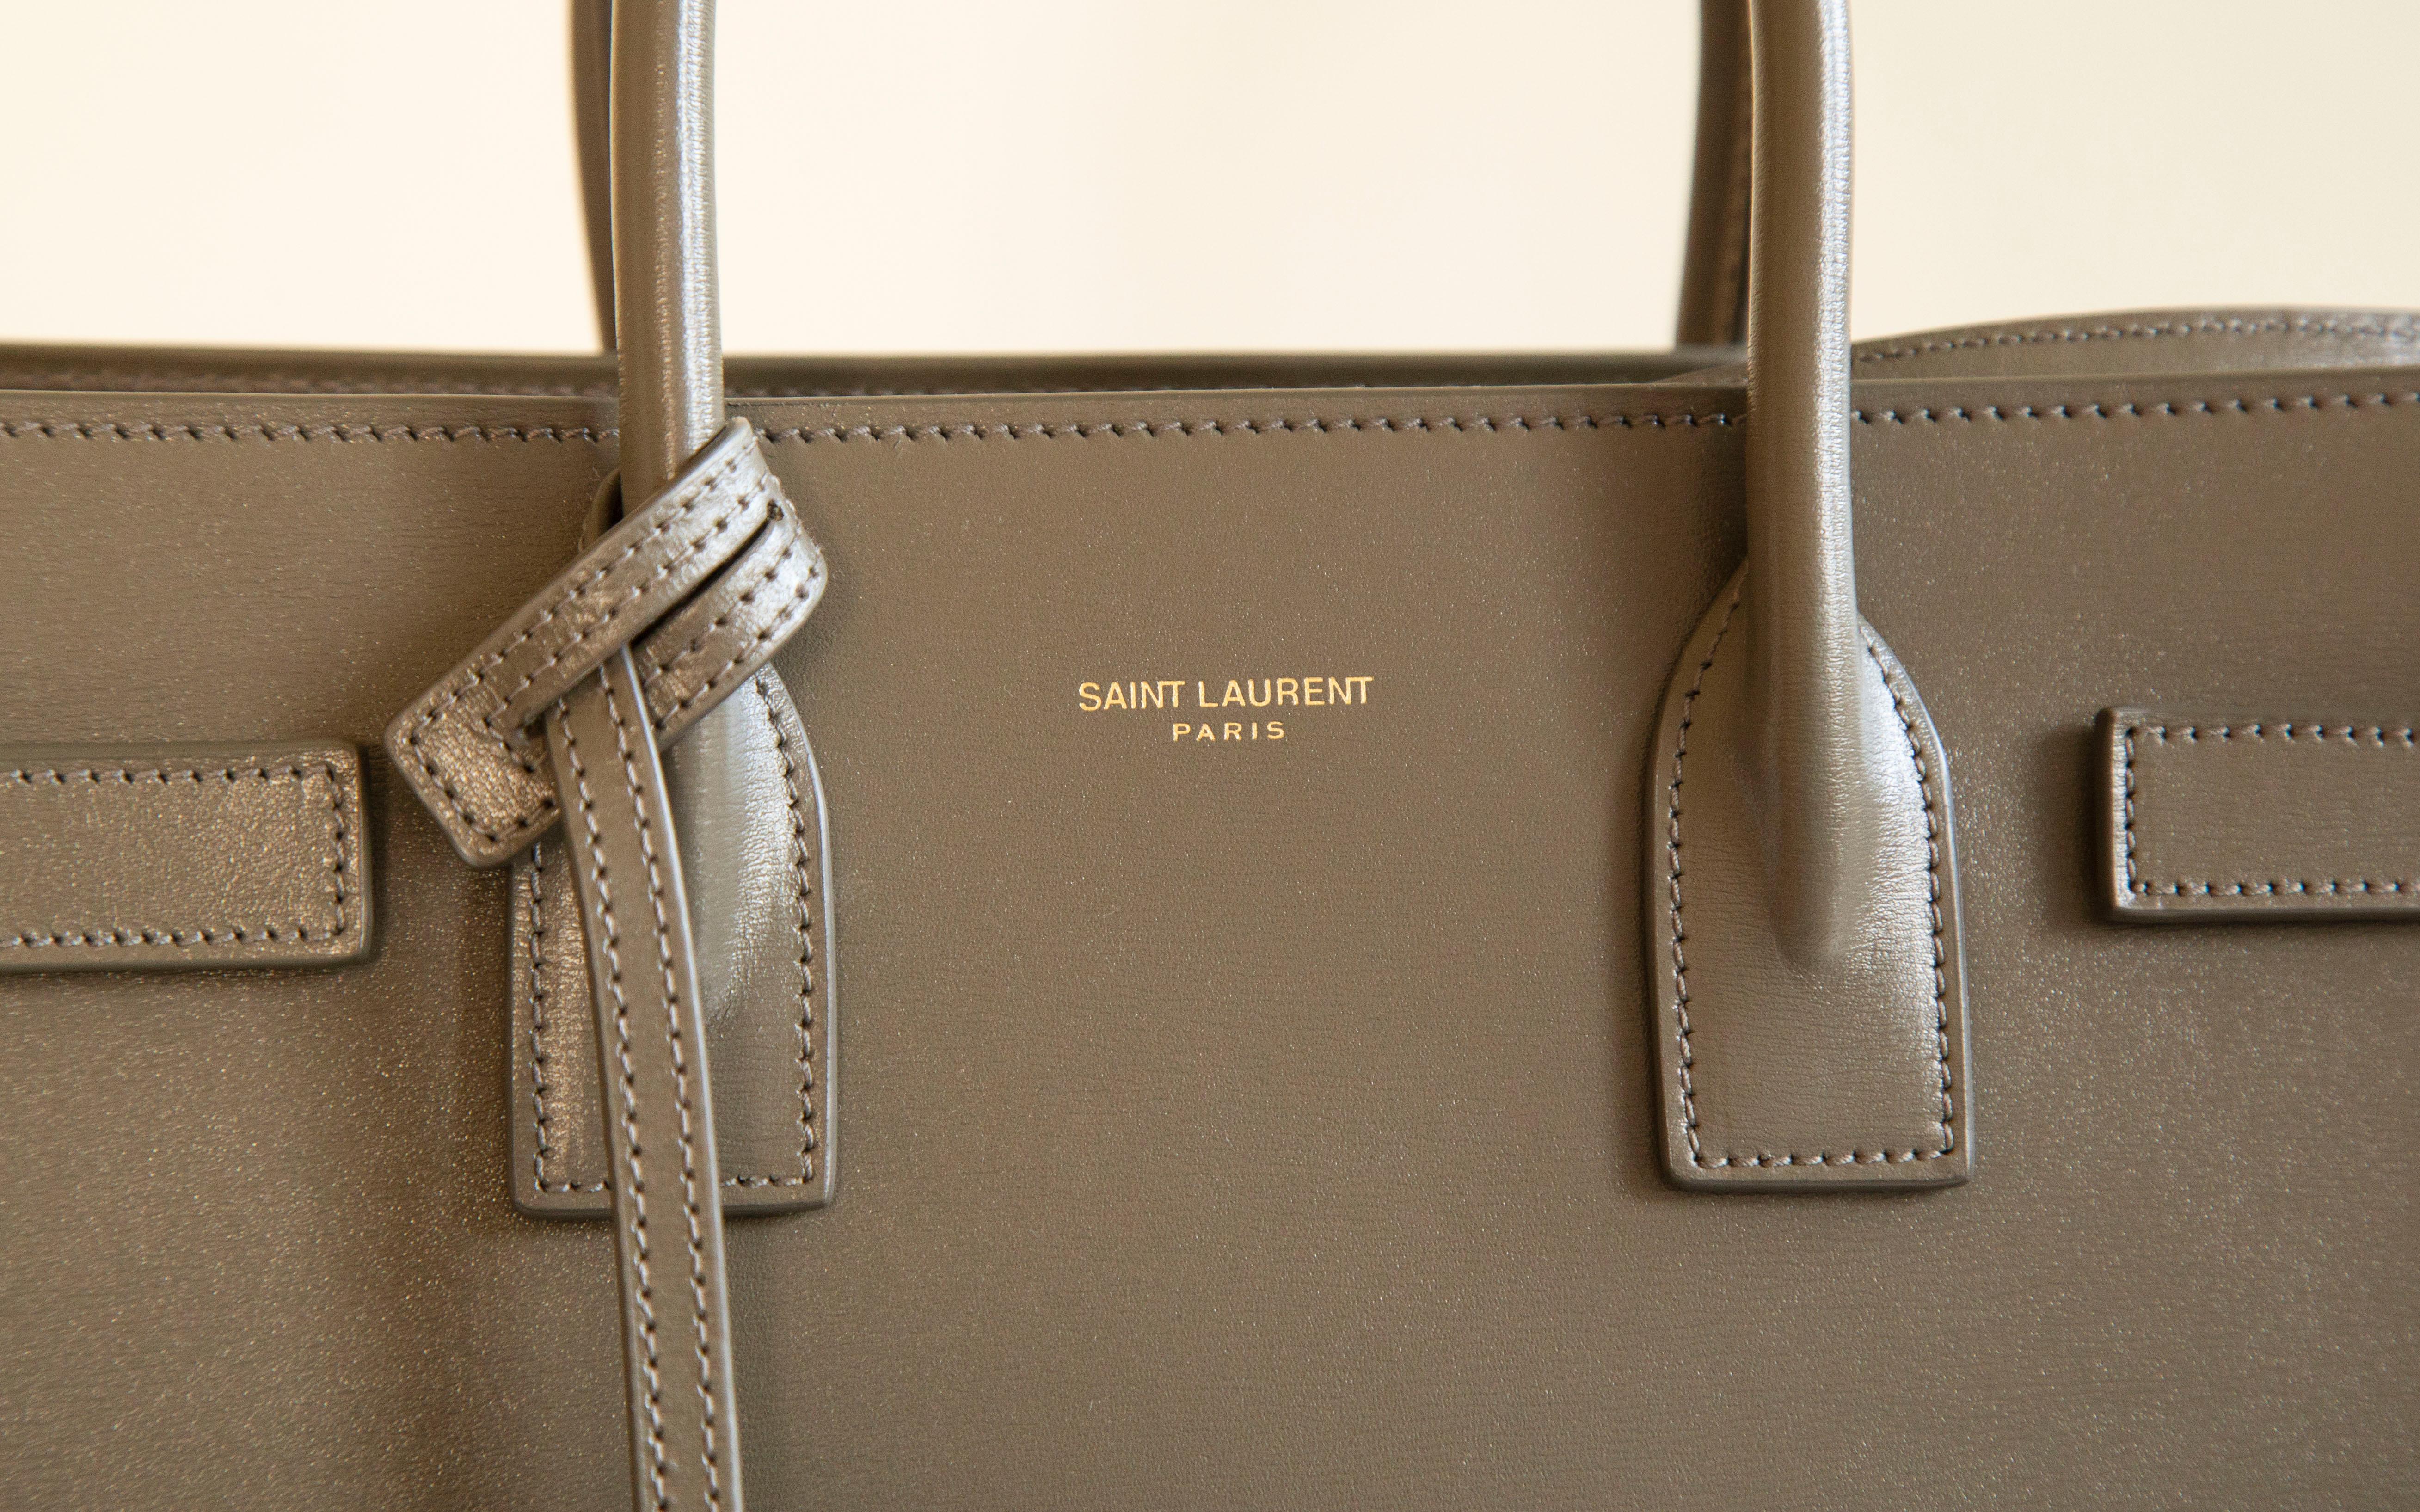 Saint Laurent’s khaki-green Sac de Jour Baby top handle bag/shoulder bag/crossbody bag. The interior is divided into two  compartments divided by a removable zipped pochette.  The hardware is gold tone. The strap is adjustable (max. 120 cm ) and